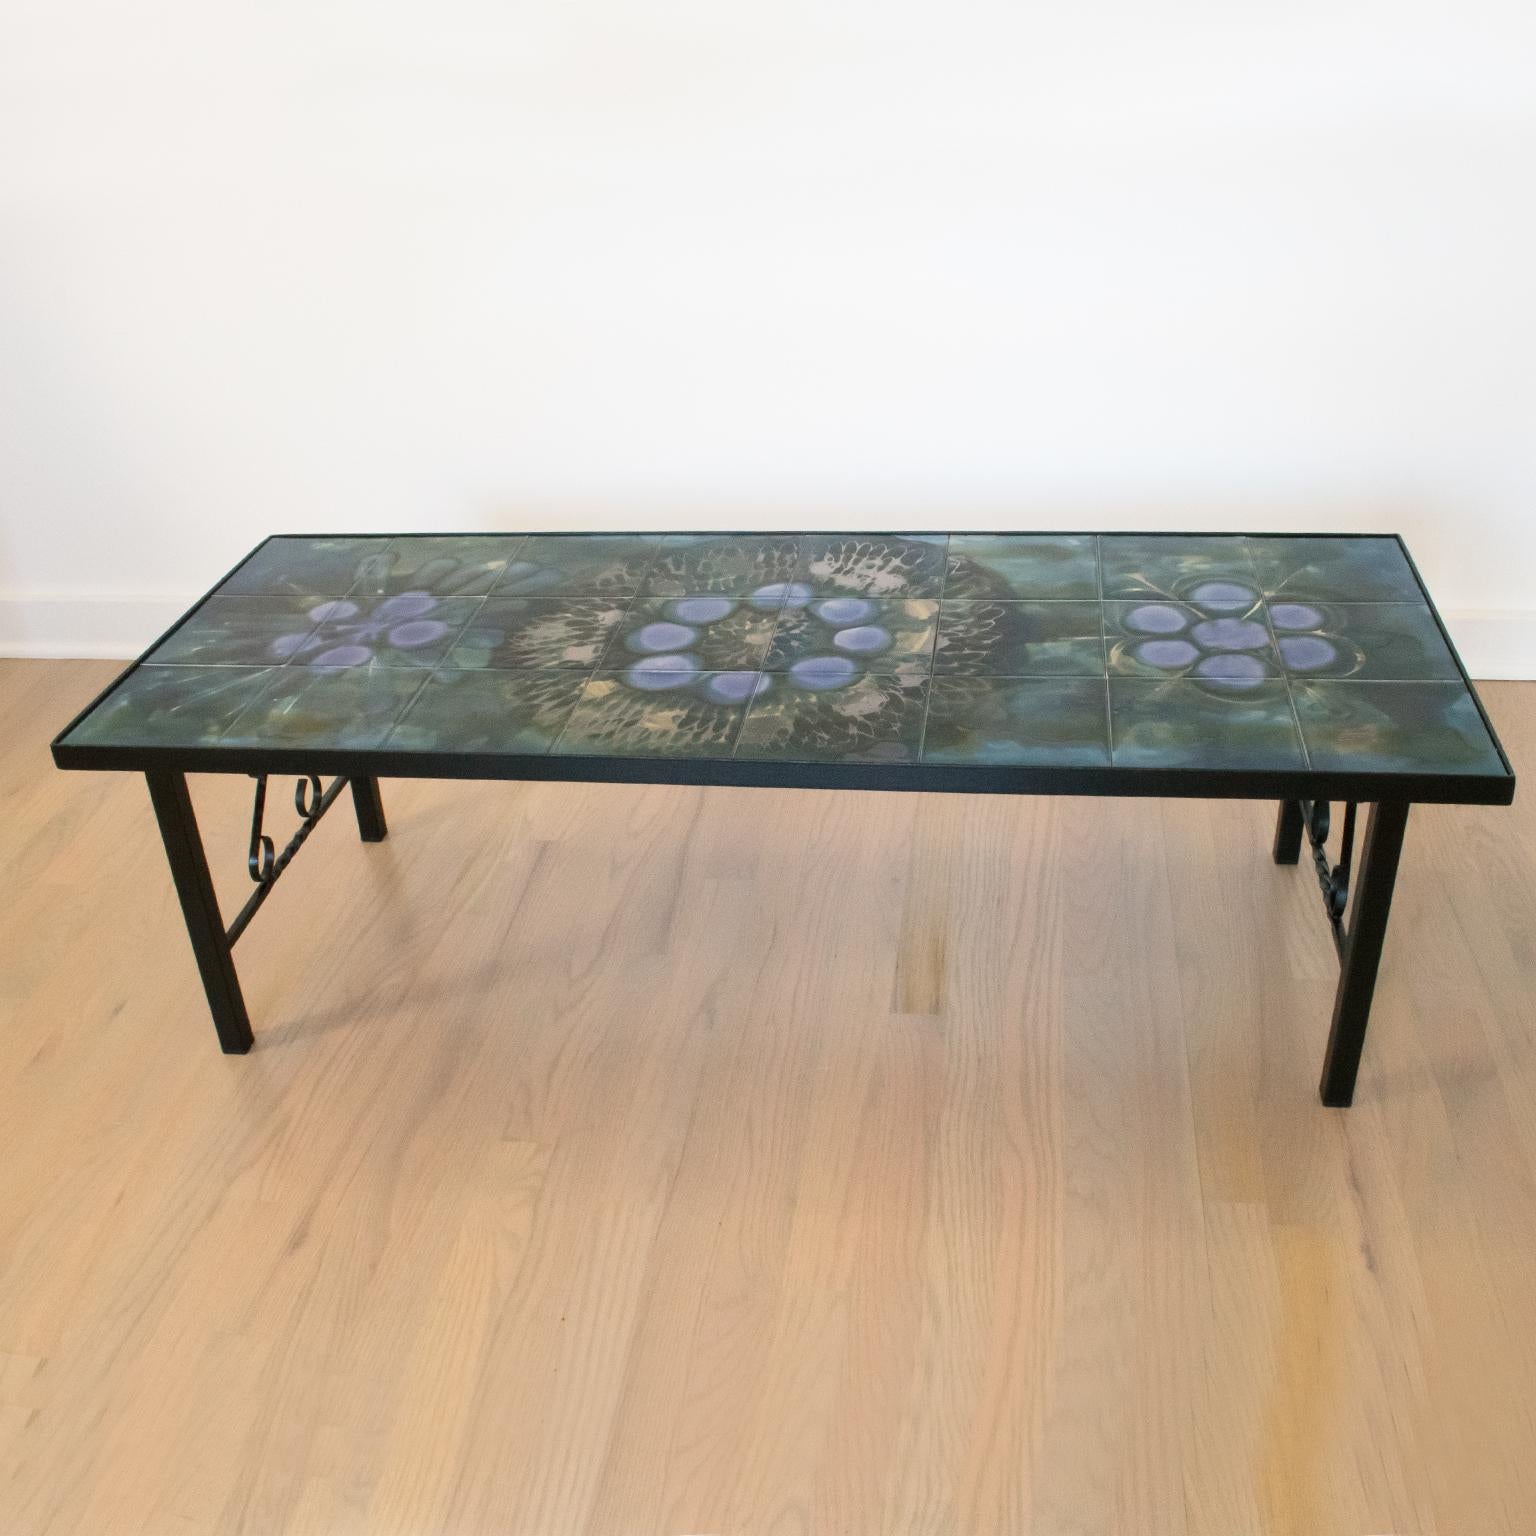 Belarti Wrought Iron Ceramic Tile Side Coffee Table, 1960s For Sale 5